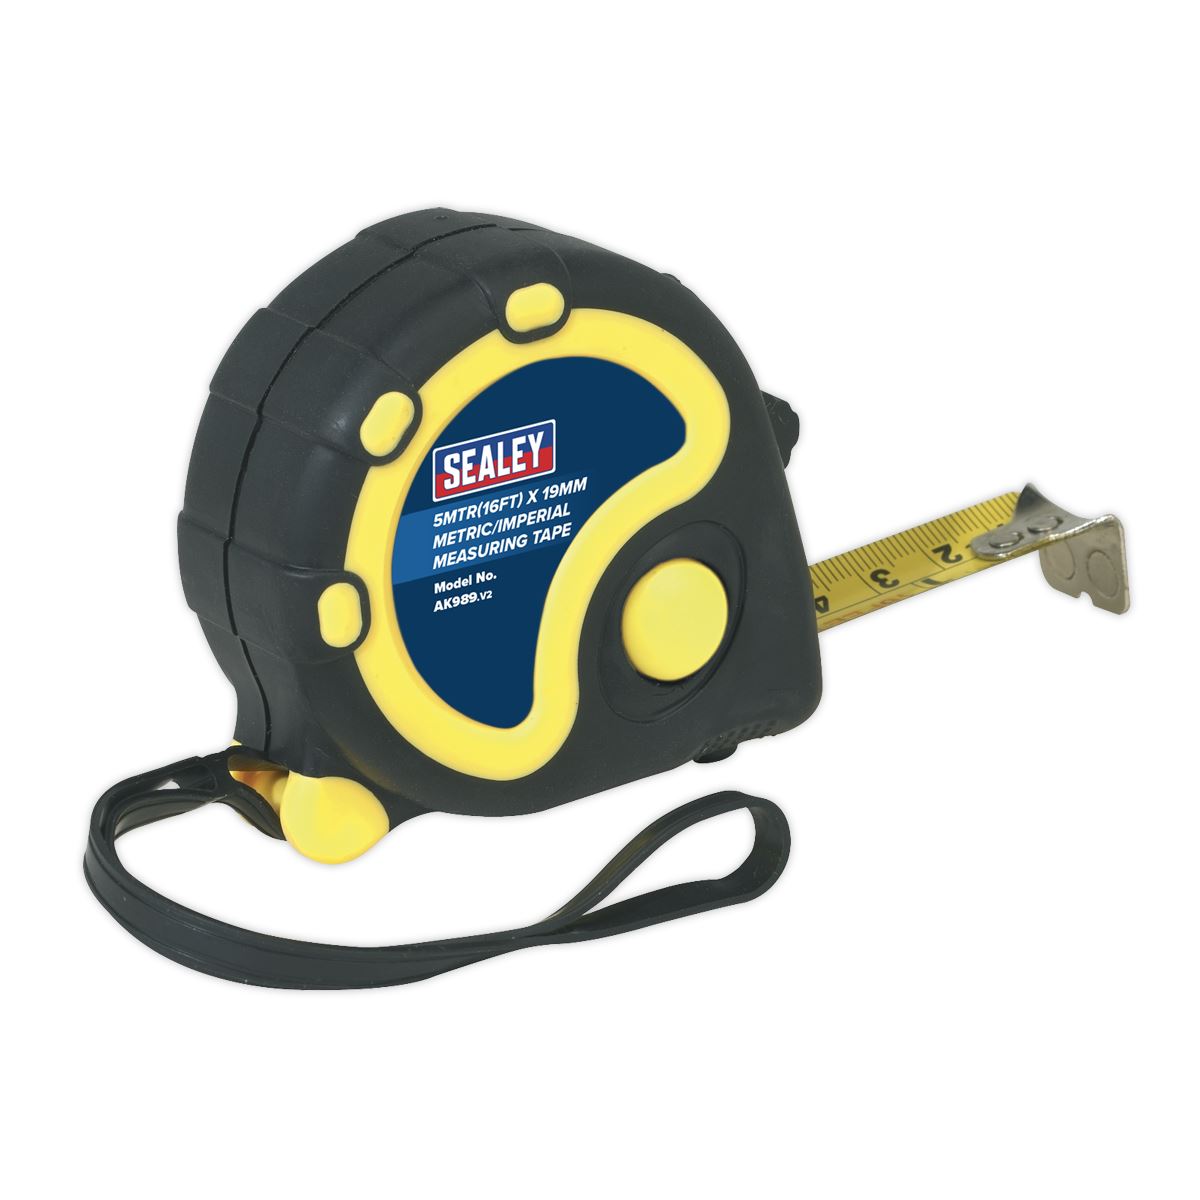 Sealey Rubber Tape Measure 5m(16ft) x 19mm - Metric/Imperial